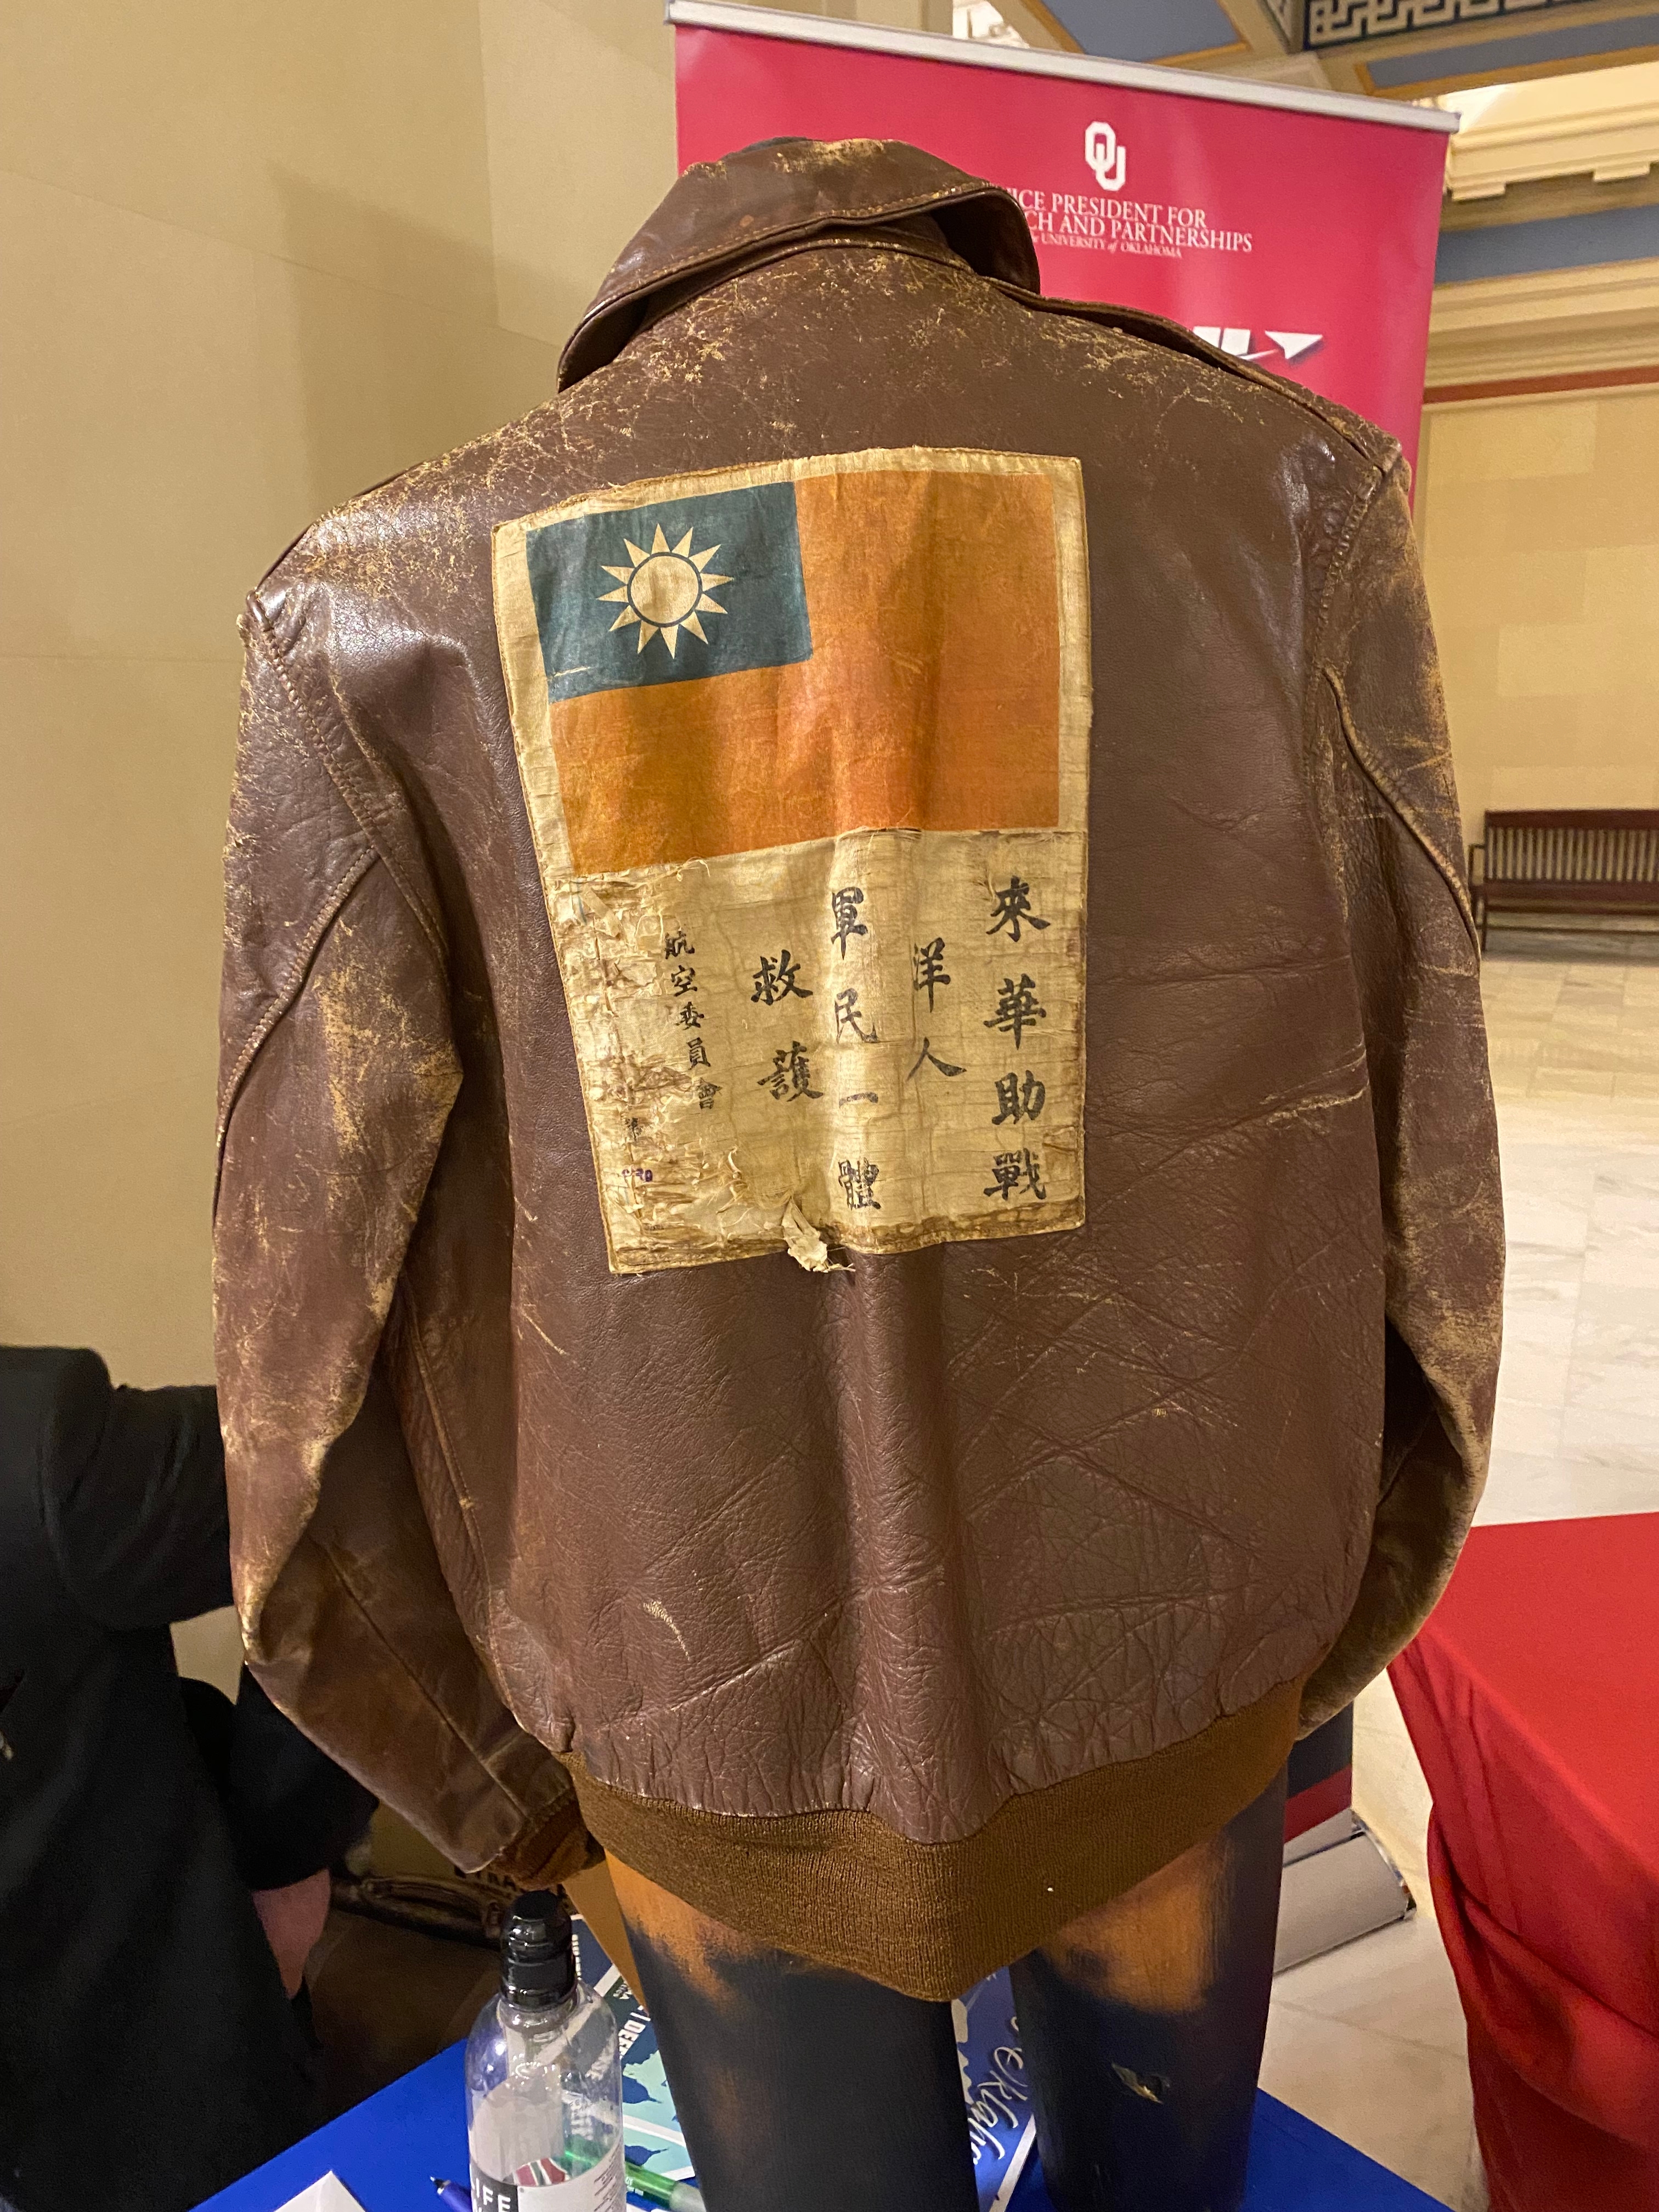 WWII pilot's jacket on display from the Tulsa Air and Space Museum